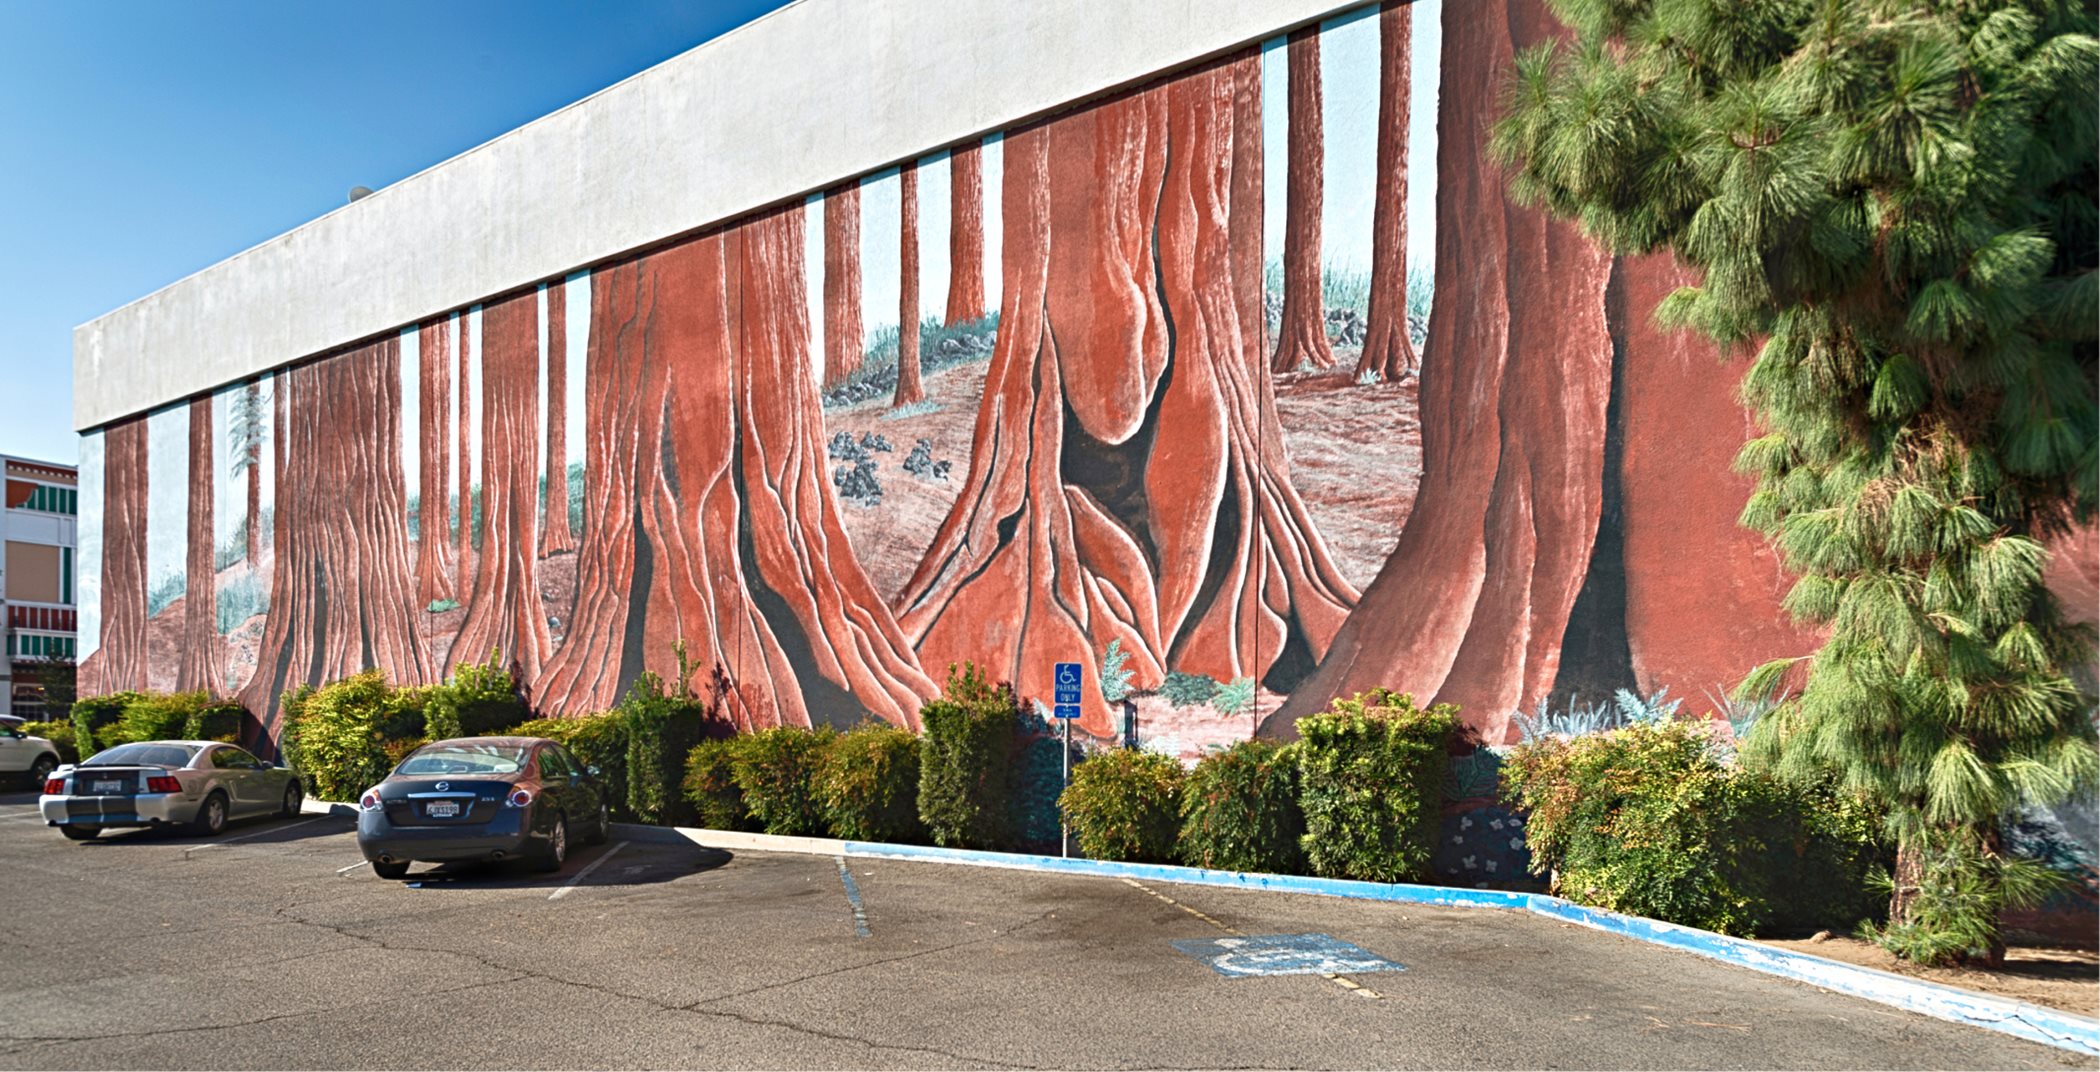 mural depicts the Giant Sequioas